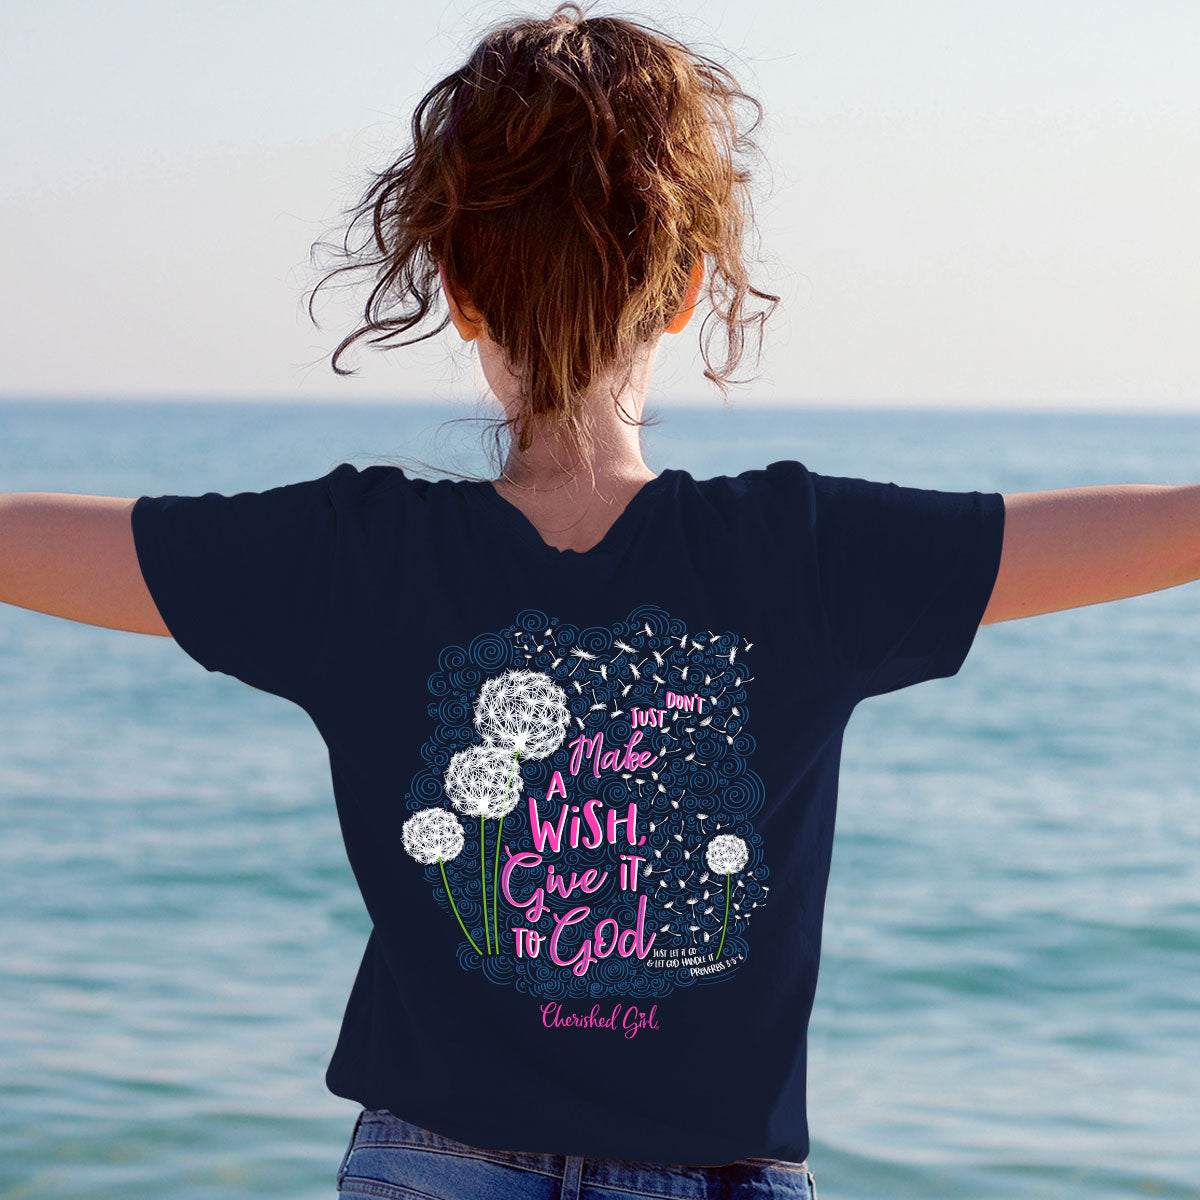 Cherished Girl Womens T-Shirt Give It To God